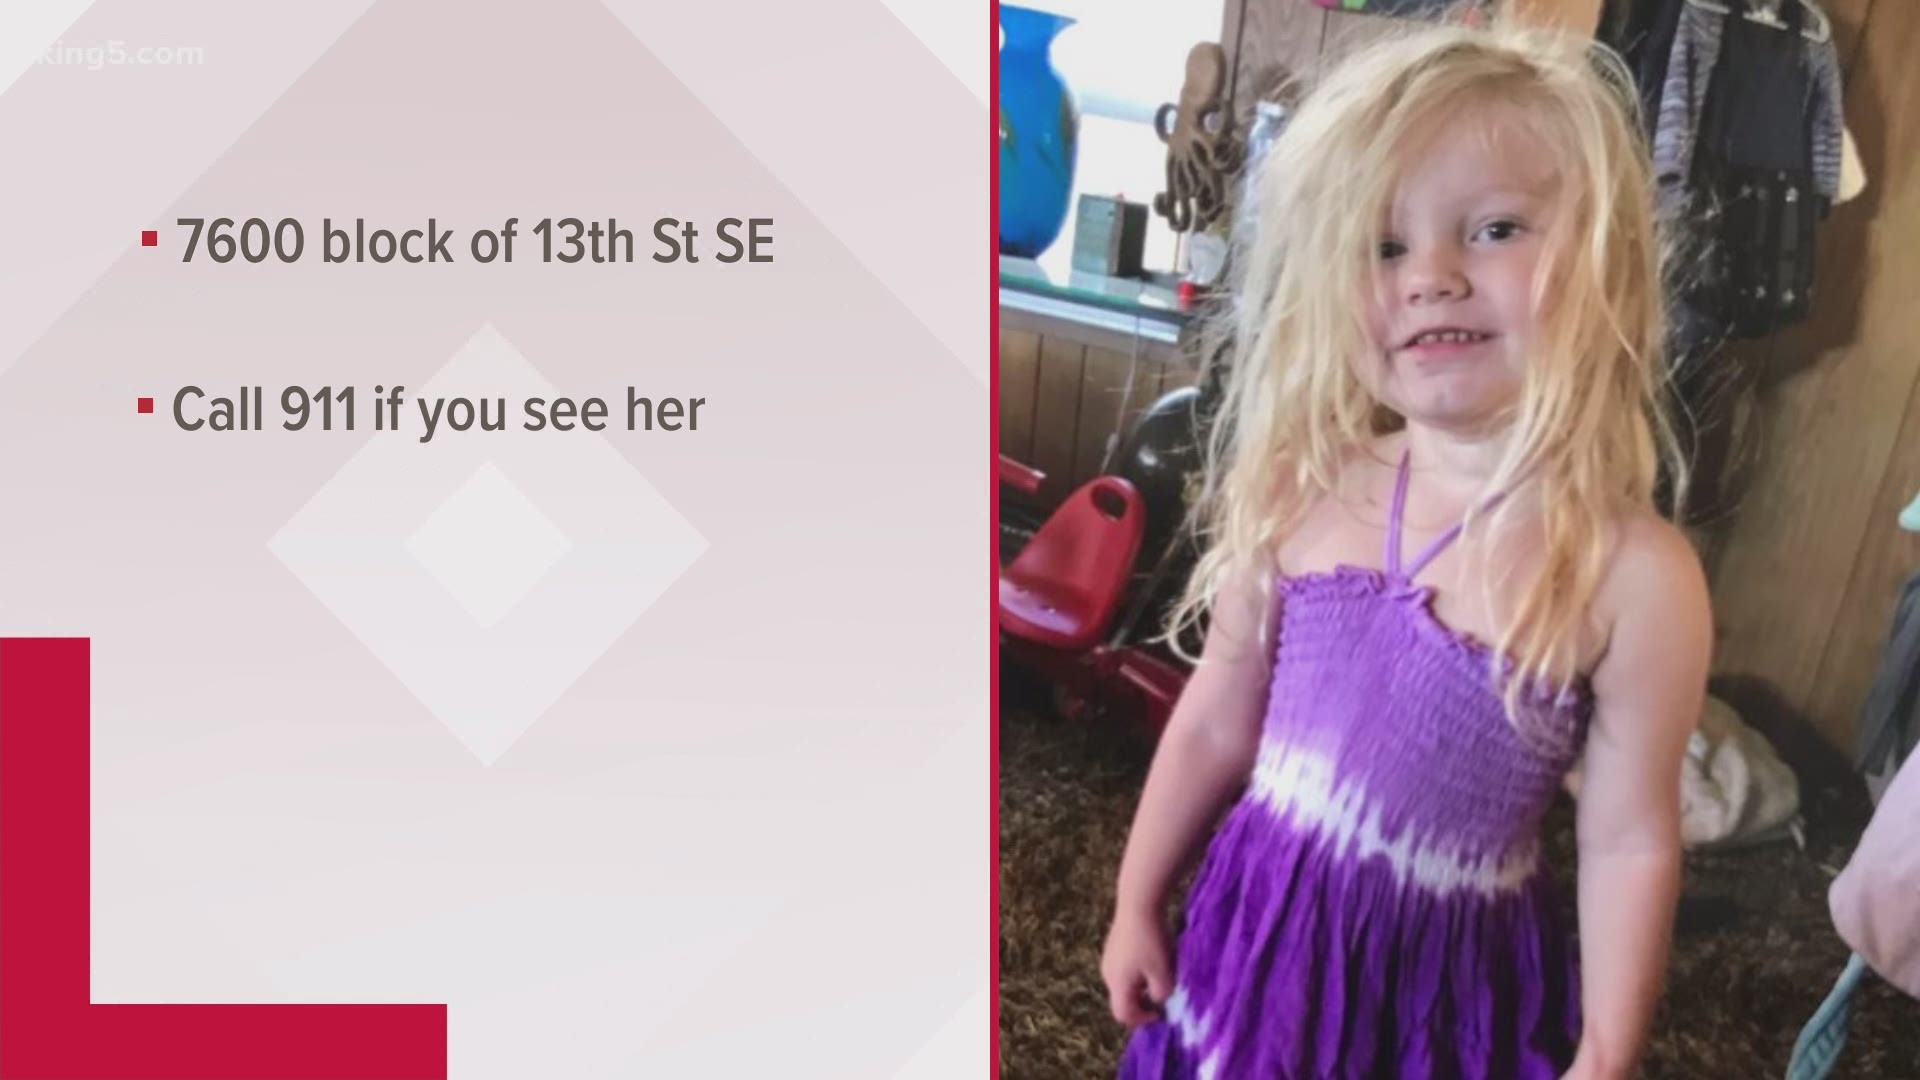 Lake Stevens police reported a little girl went missing around 4:30 p.m. Monday.